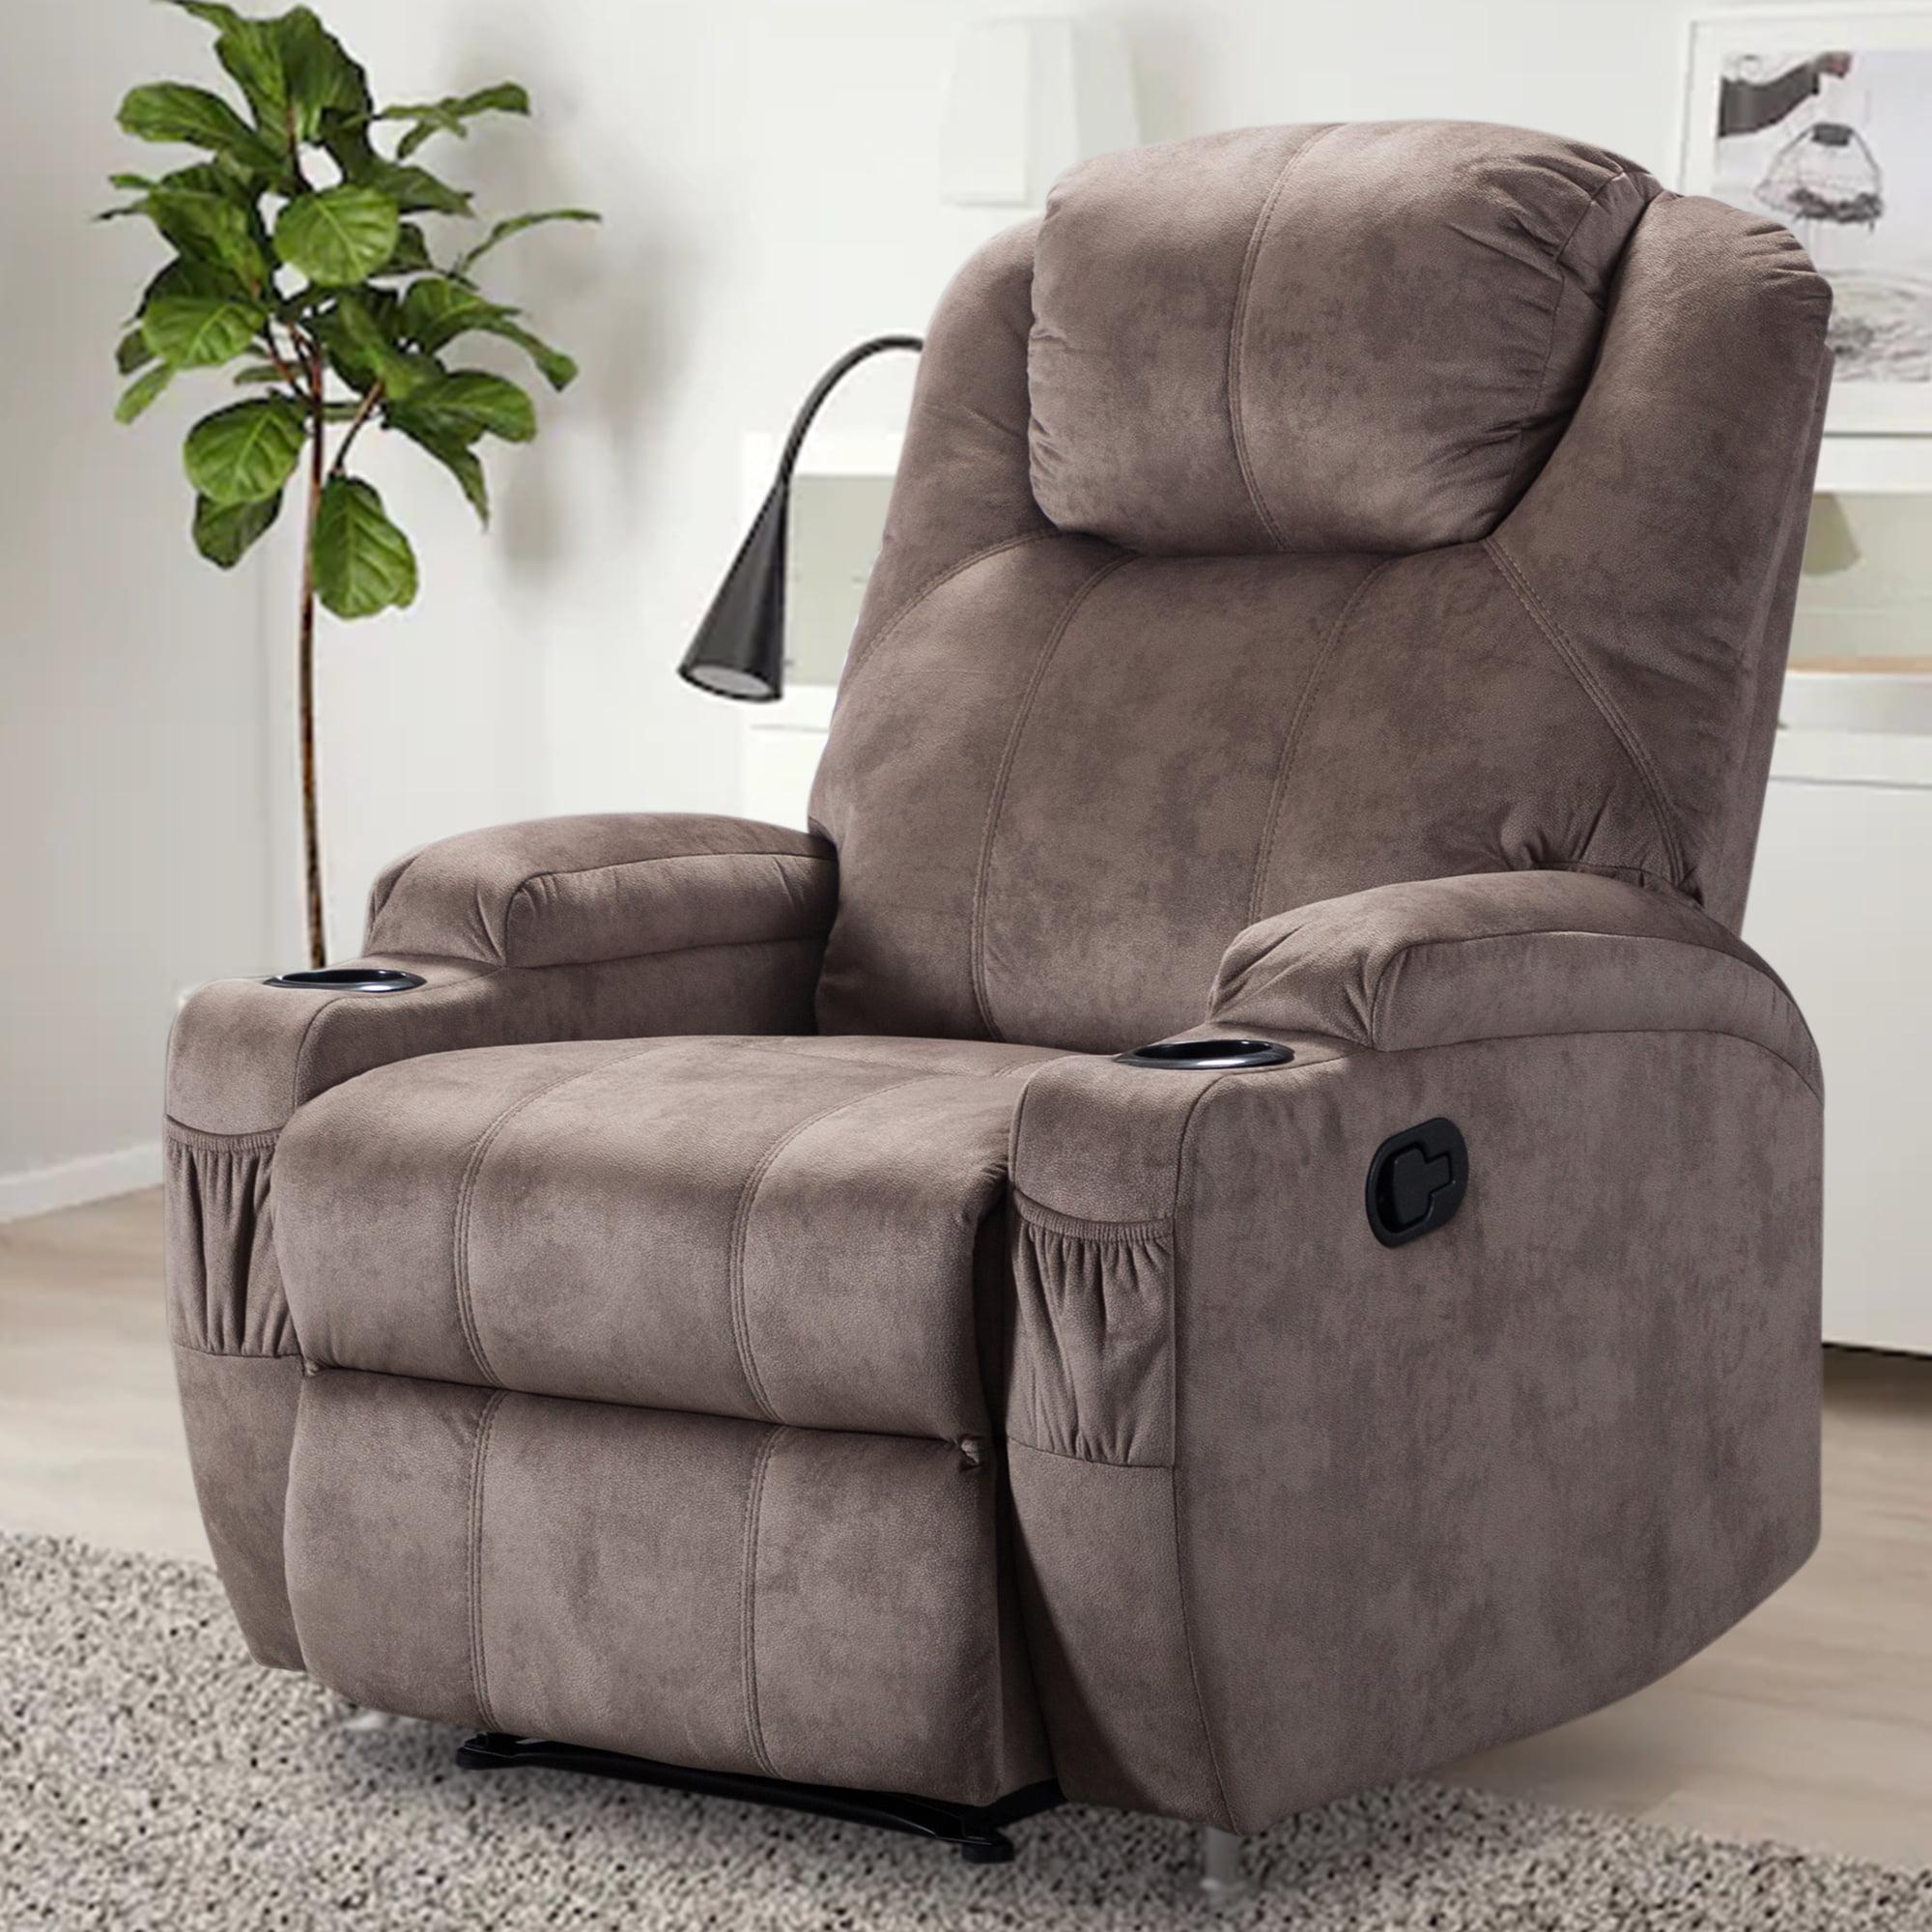 Recliner Chair, Manual Recliner Chair with 2 Cup Holders